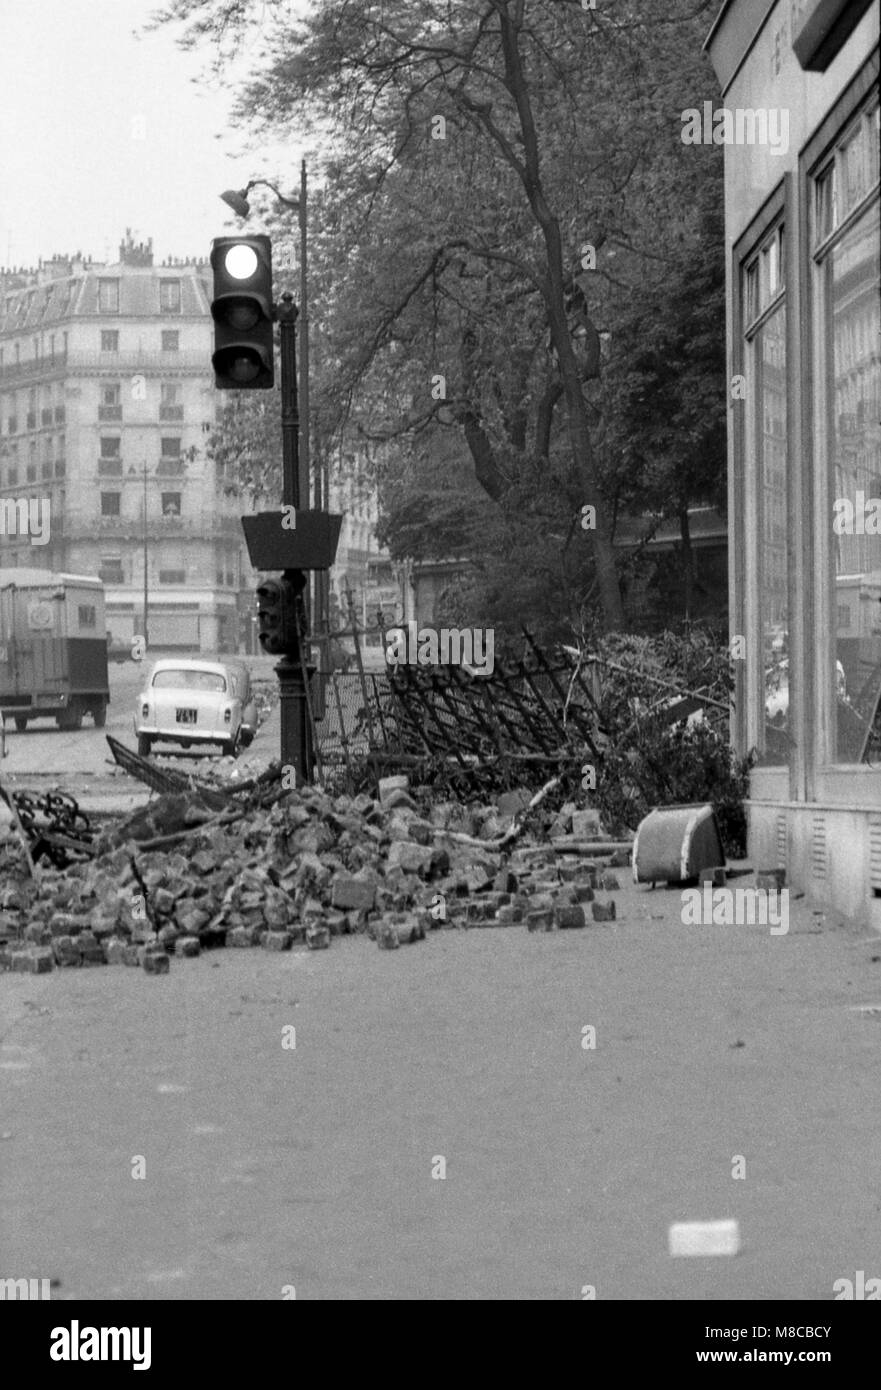 Philippe Gras / Le Pictorium -  May 68 -  1968  -  France / Ile-de-France (region) / Paris  -  The damage following the various demonstrations in the streets Stock Photo